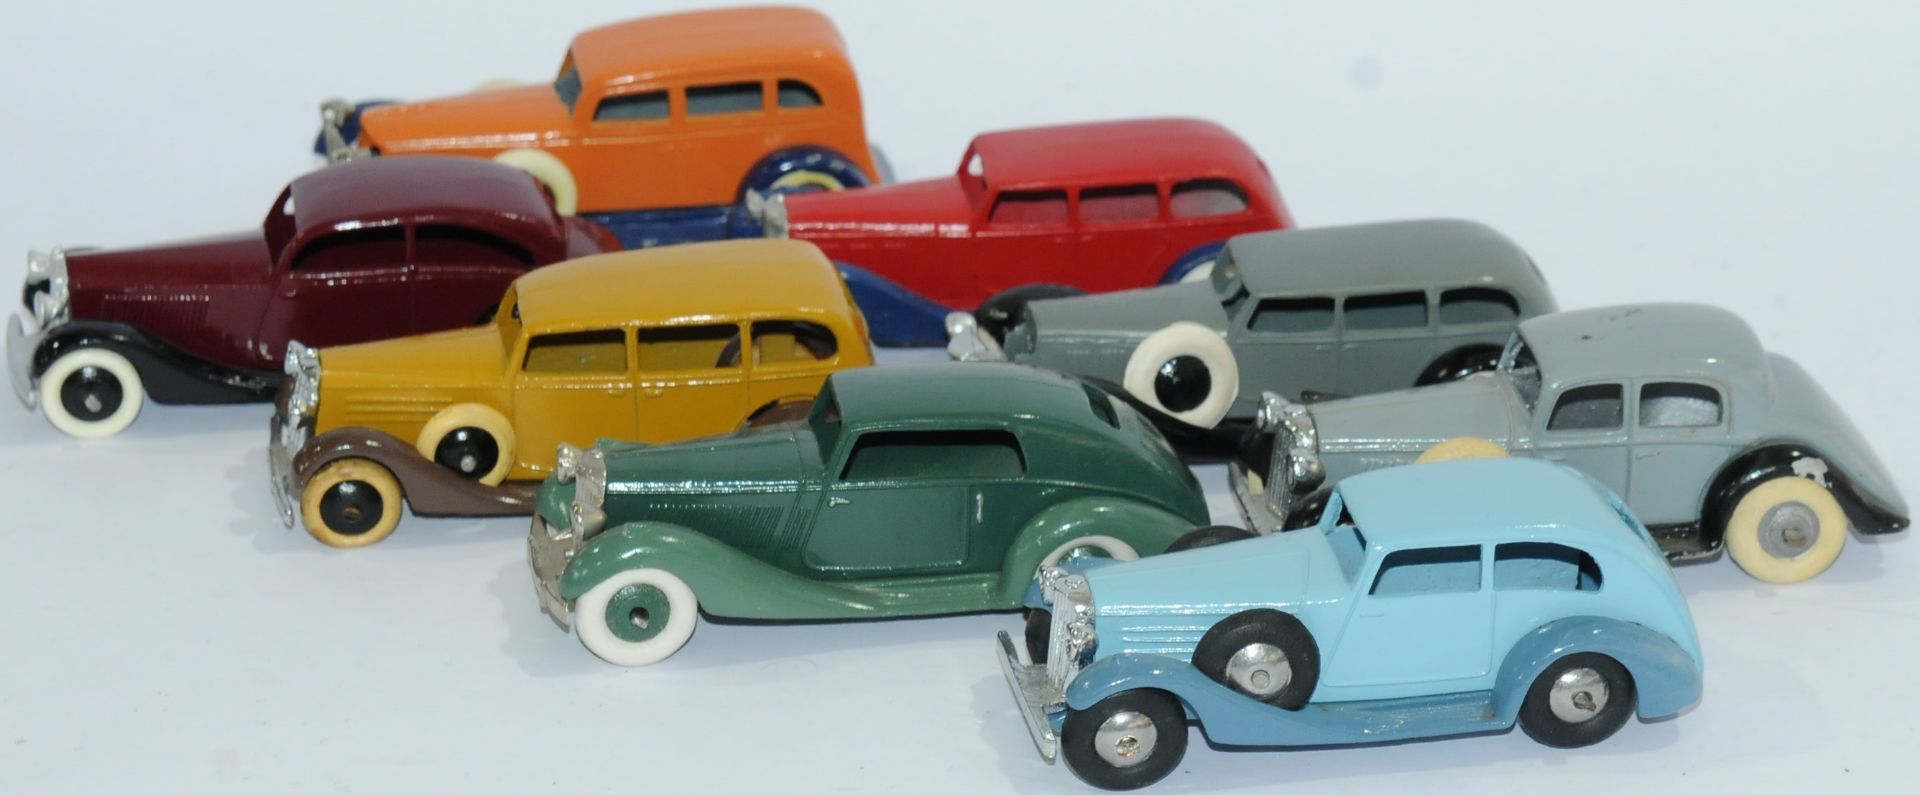 DG models or Simliar an unboxed group of classic cars